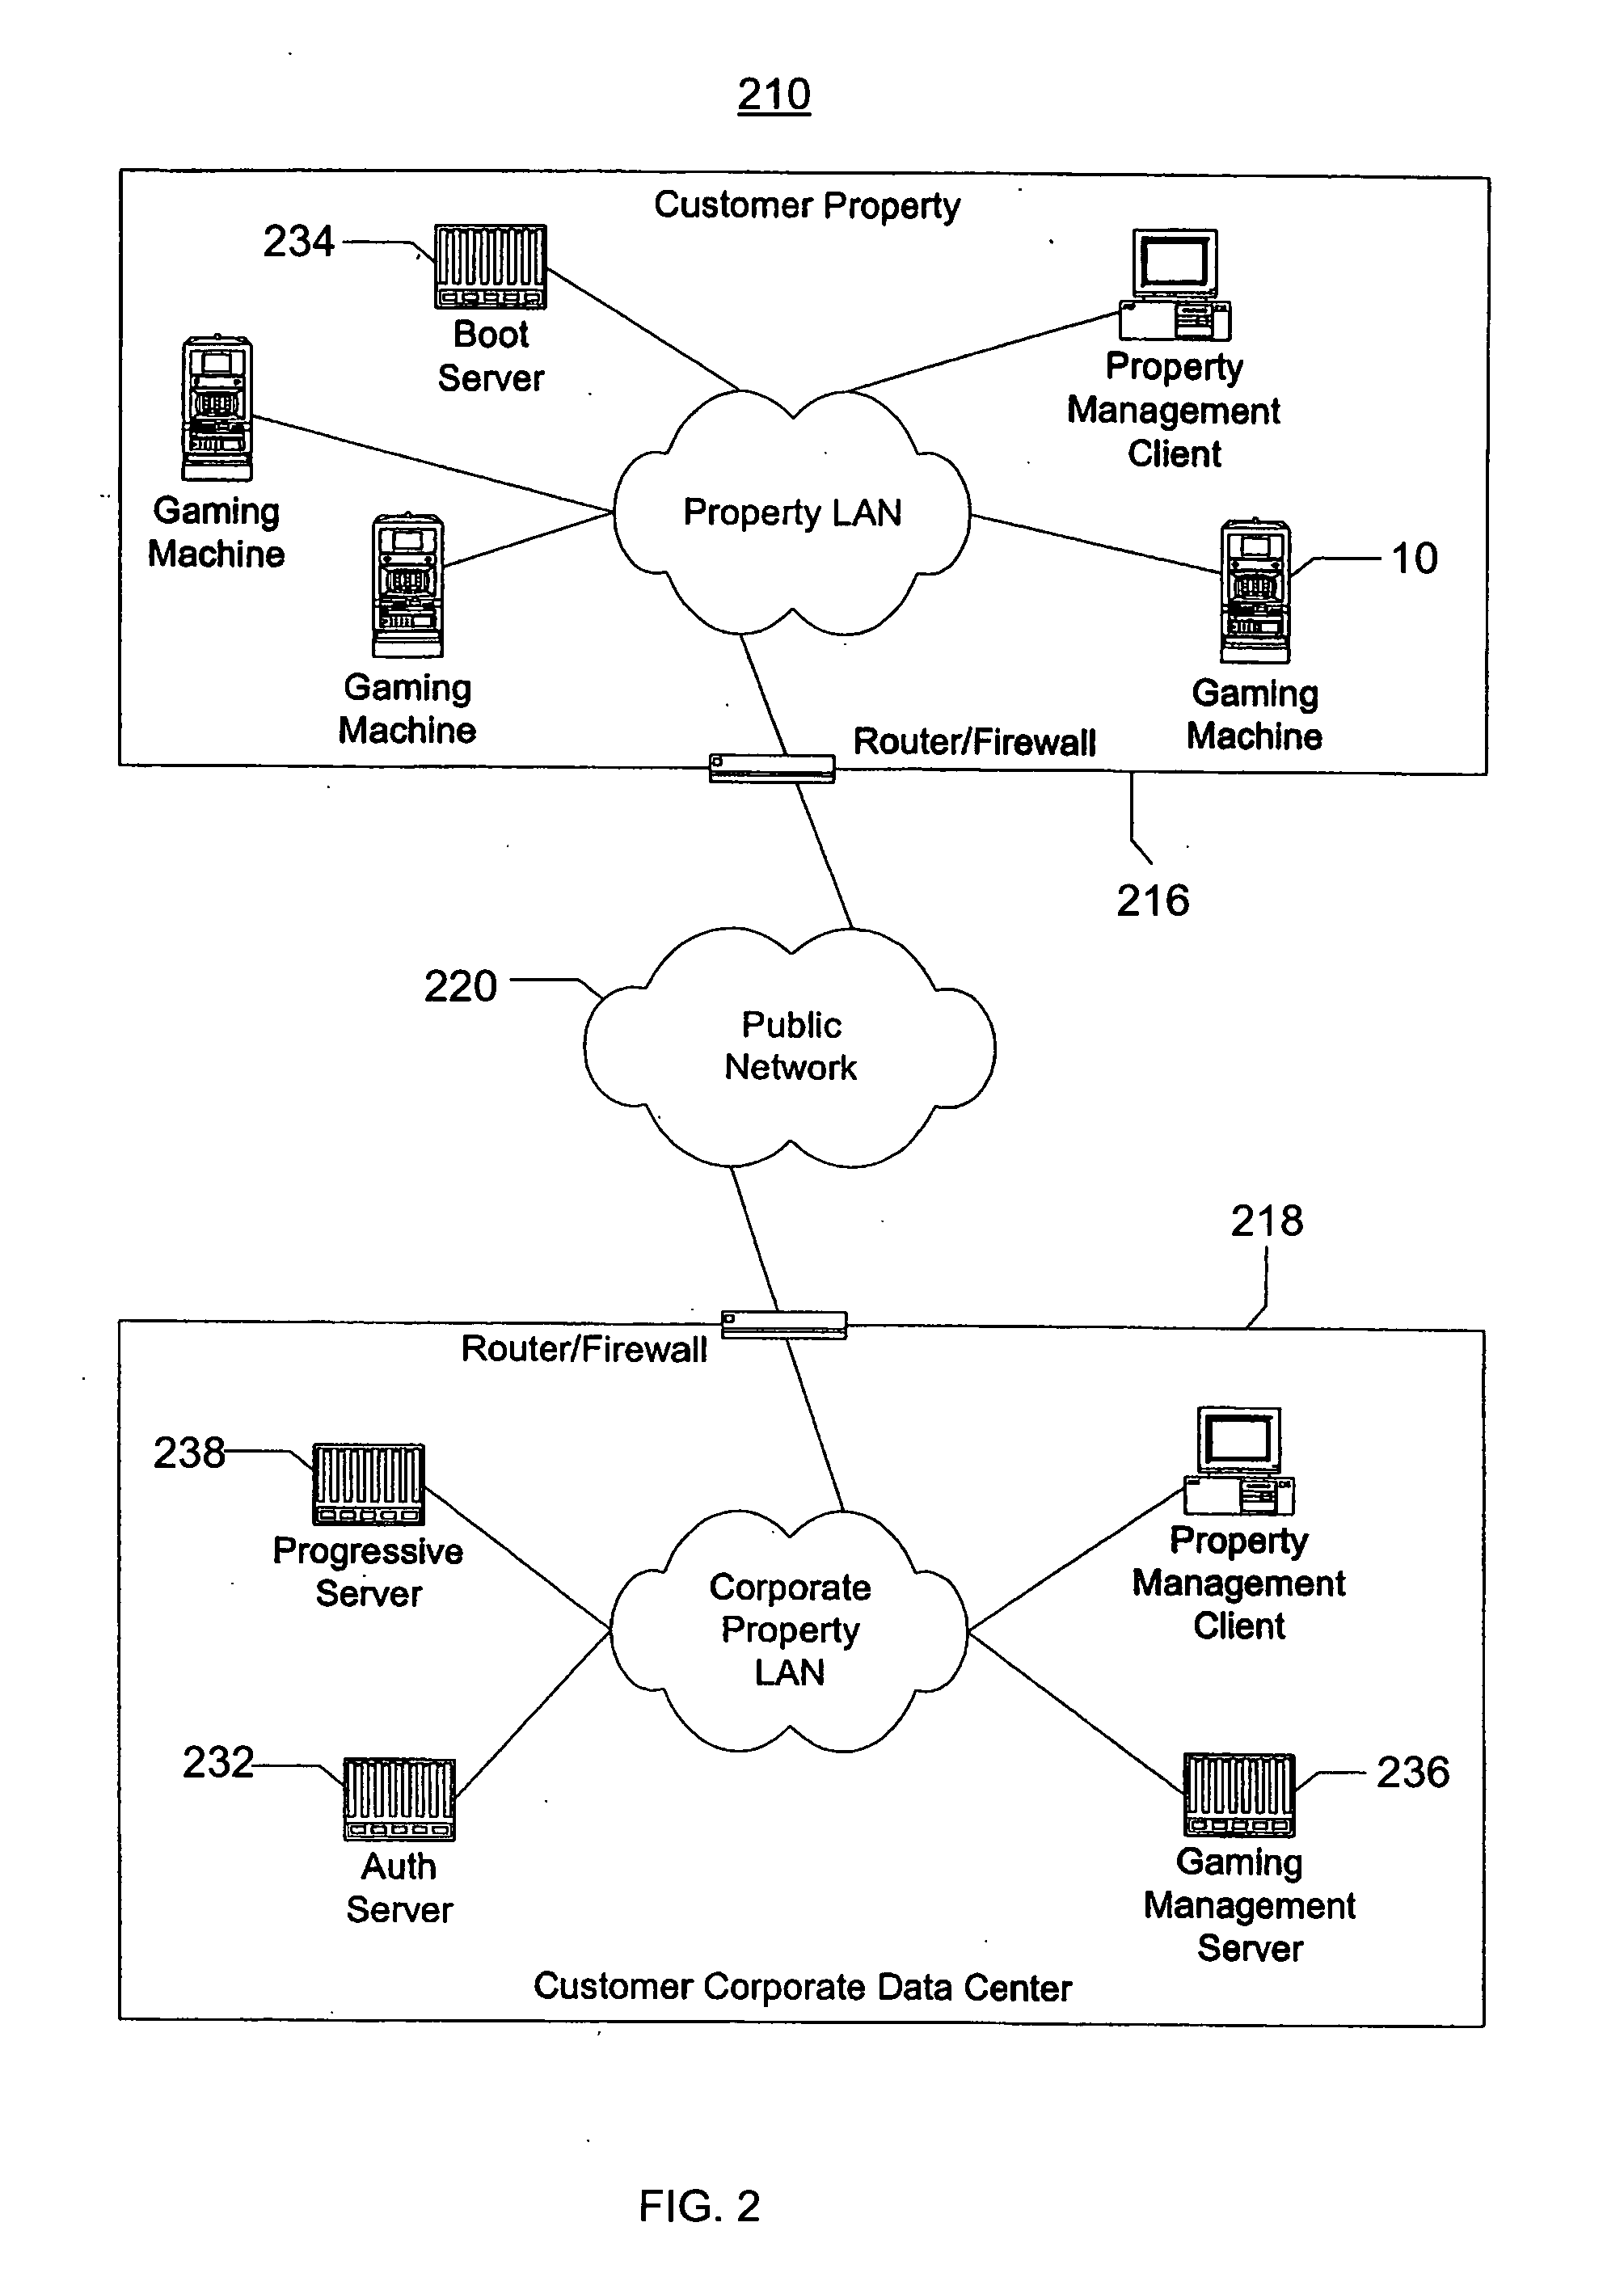 Message director service in a service-oriented gaming network environment